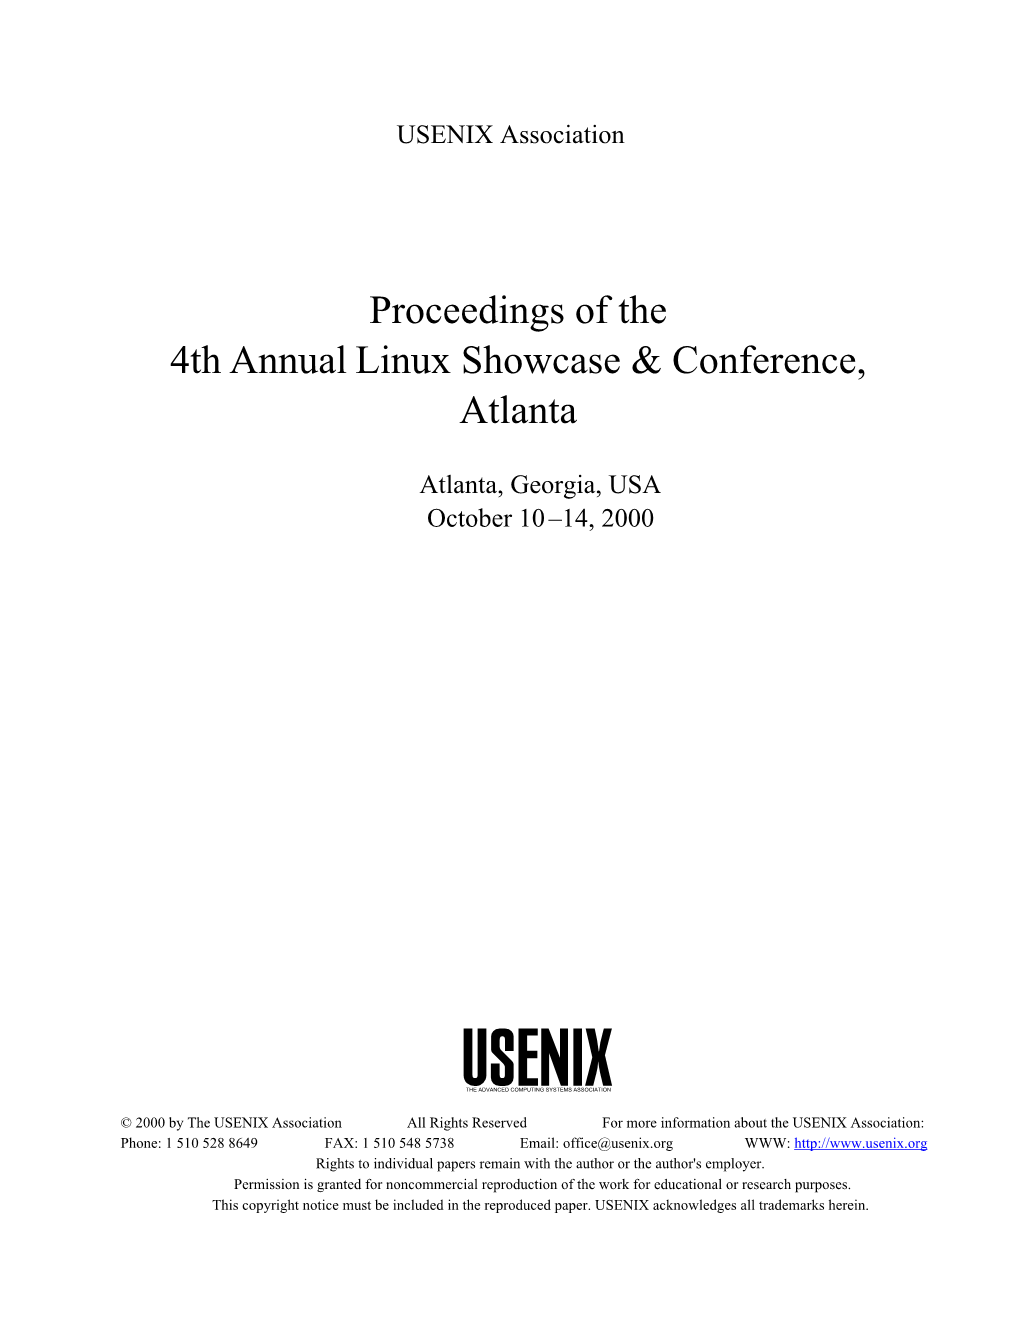 Proceedings of the 4Th Annual Linux Showcase & Conference, Atlanta